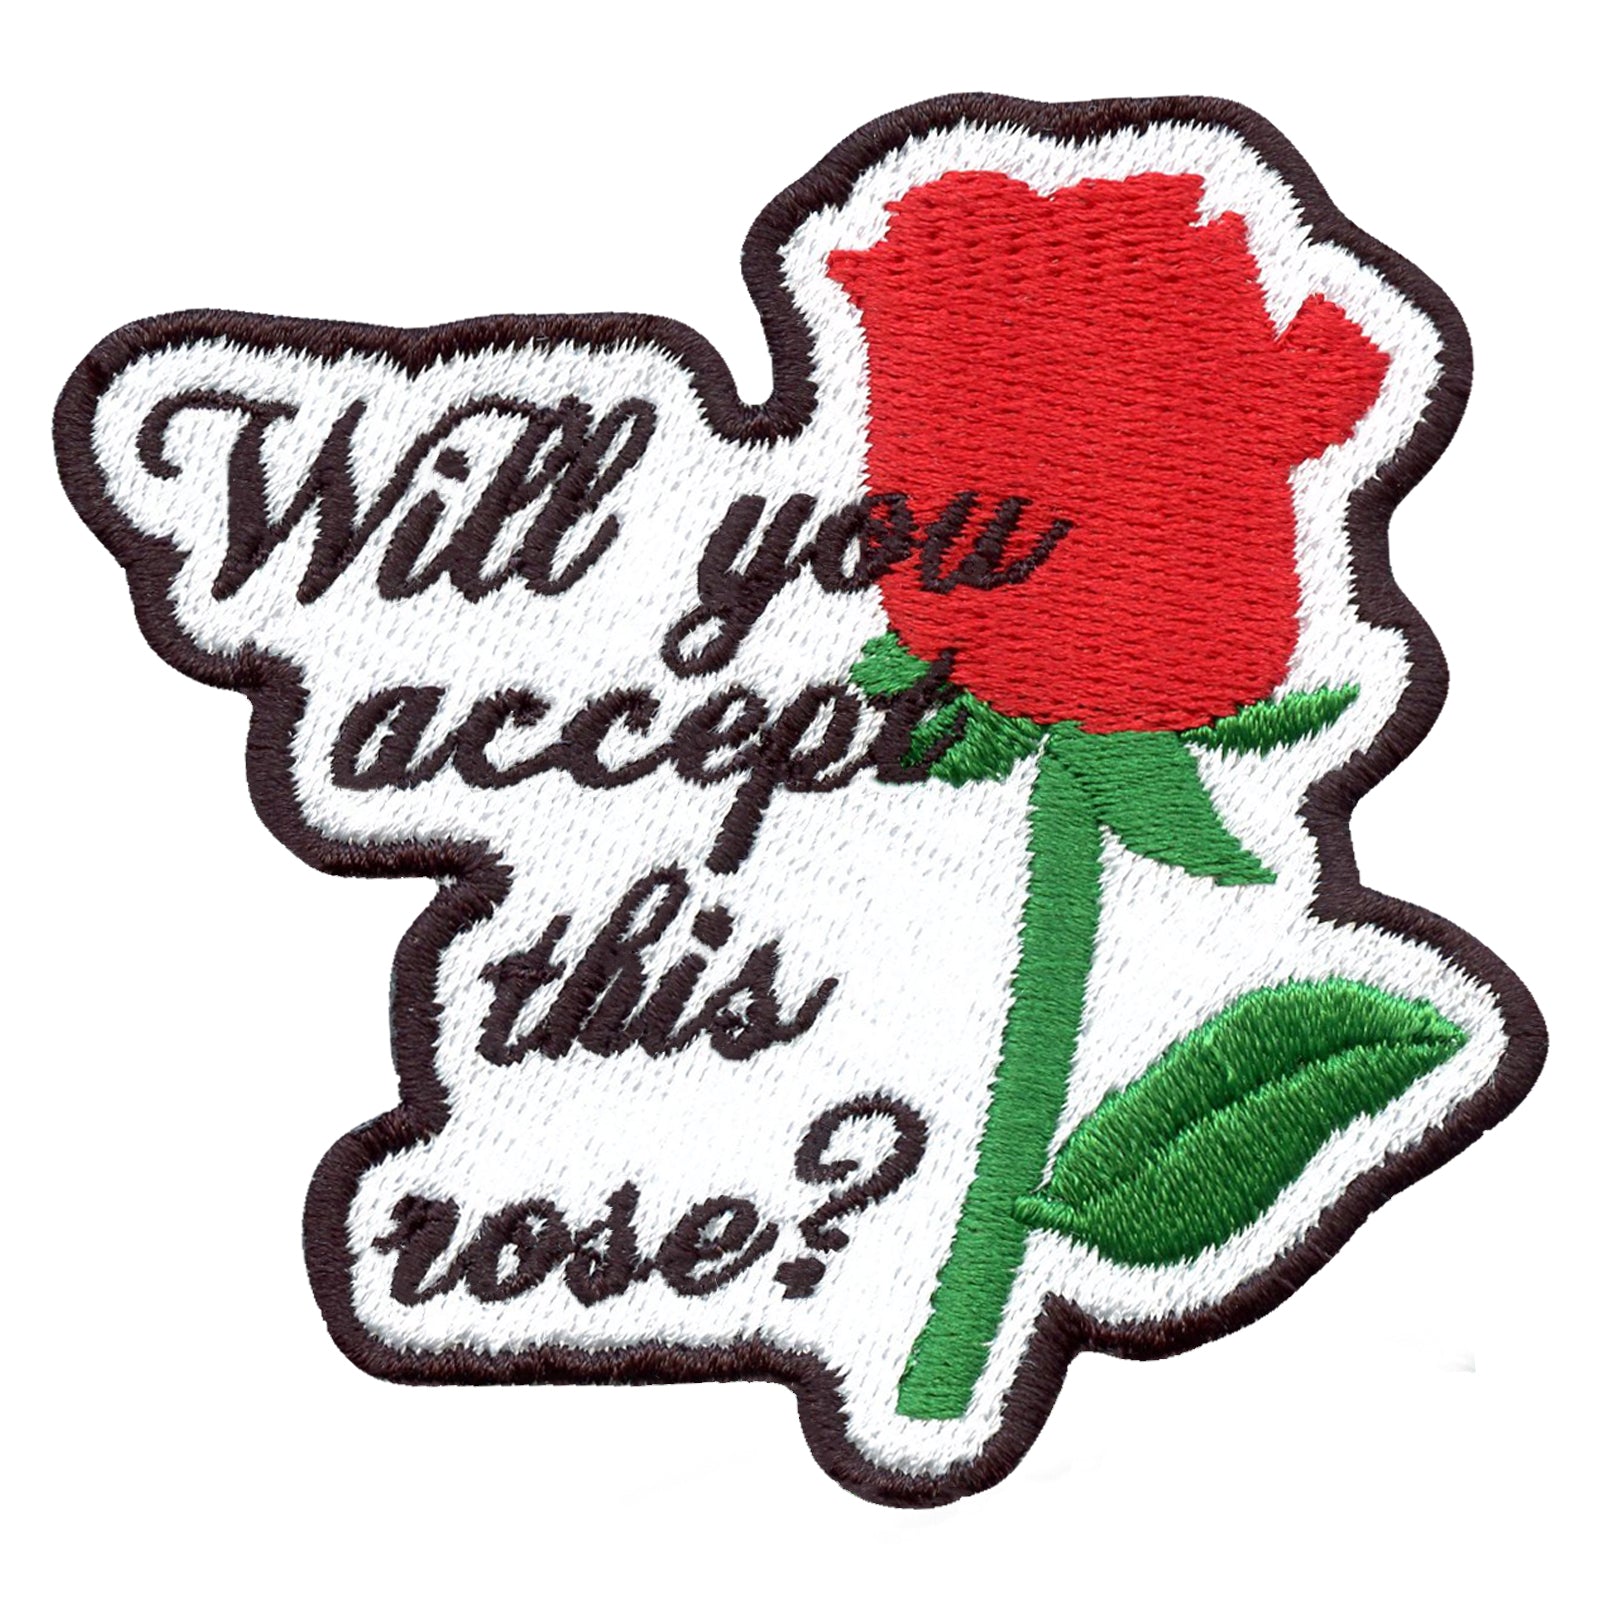 Will You Accept This Rose Embroidered Iron On Patch